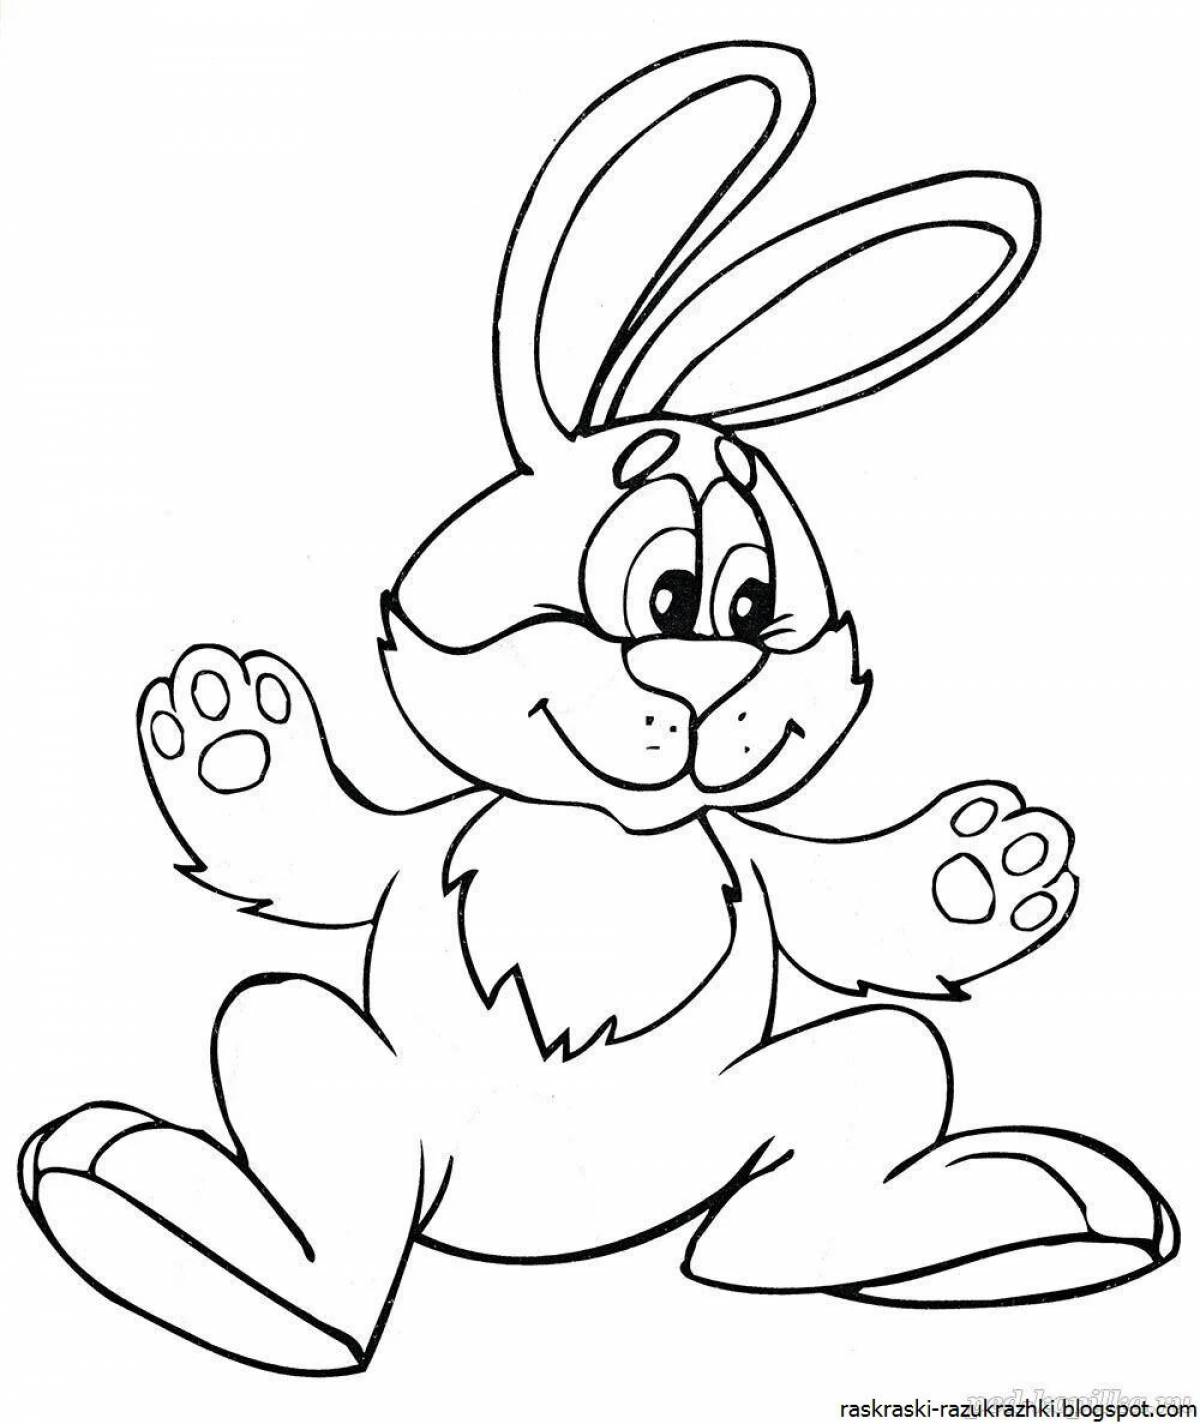 Flawless hare coloring for kids